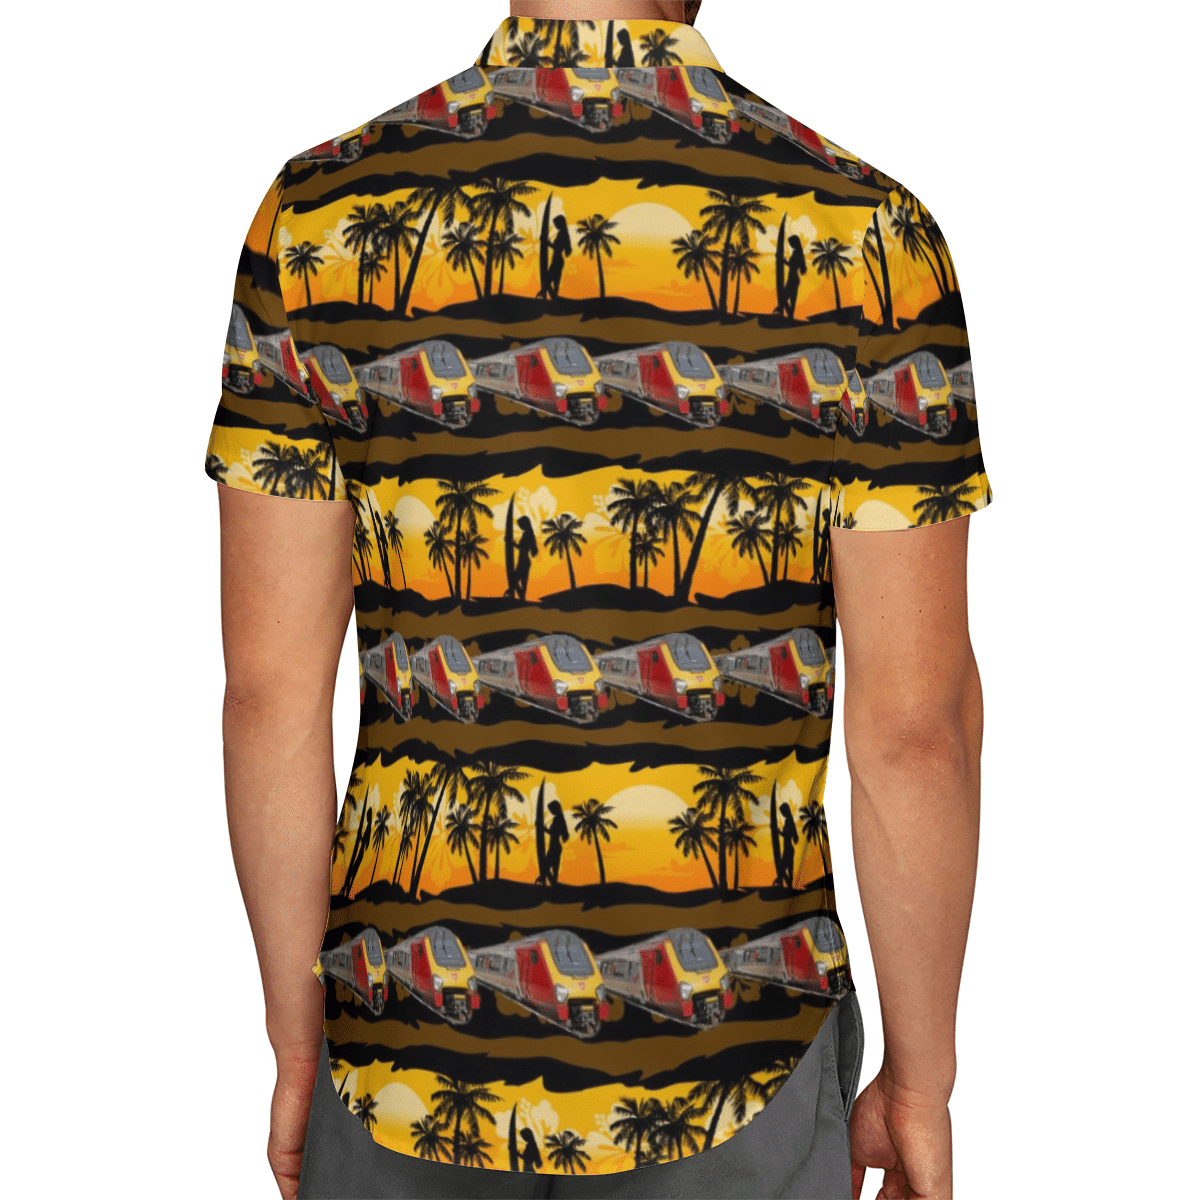 Going to the beach with a quality shirt 187